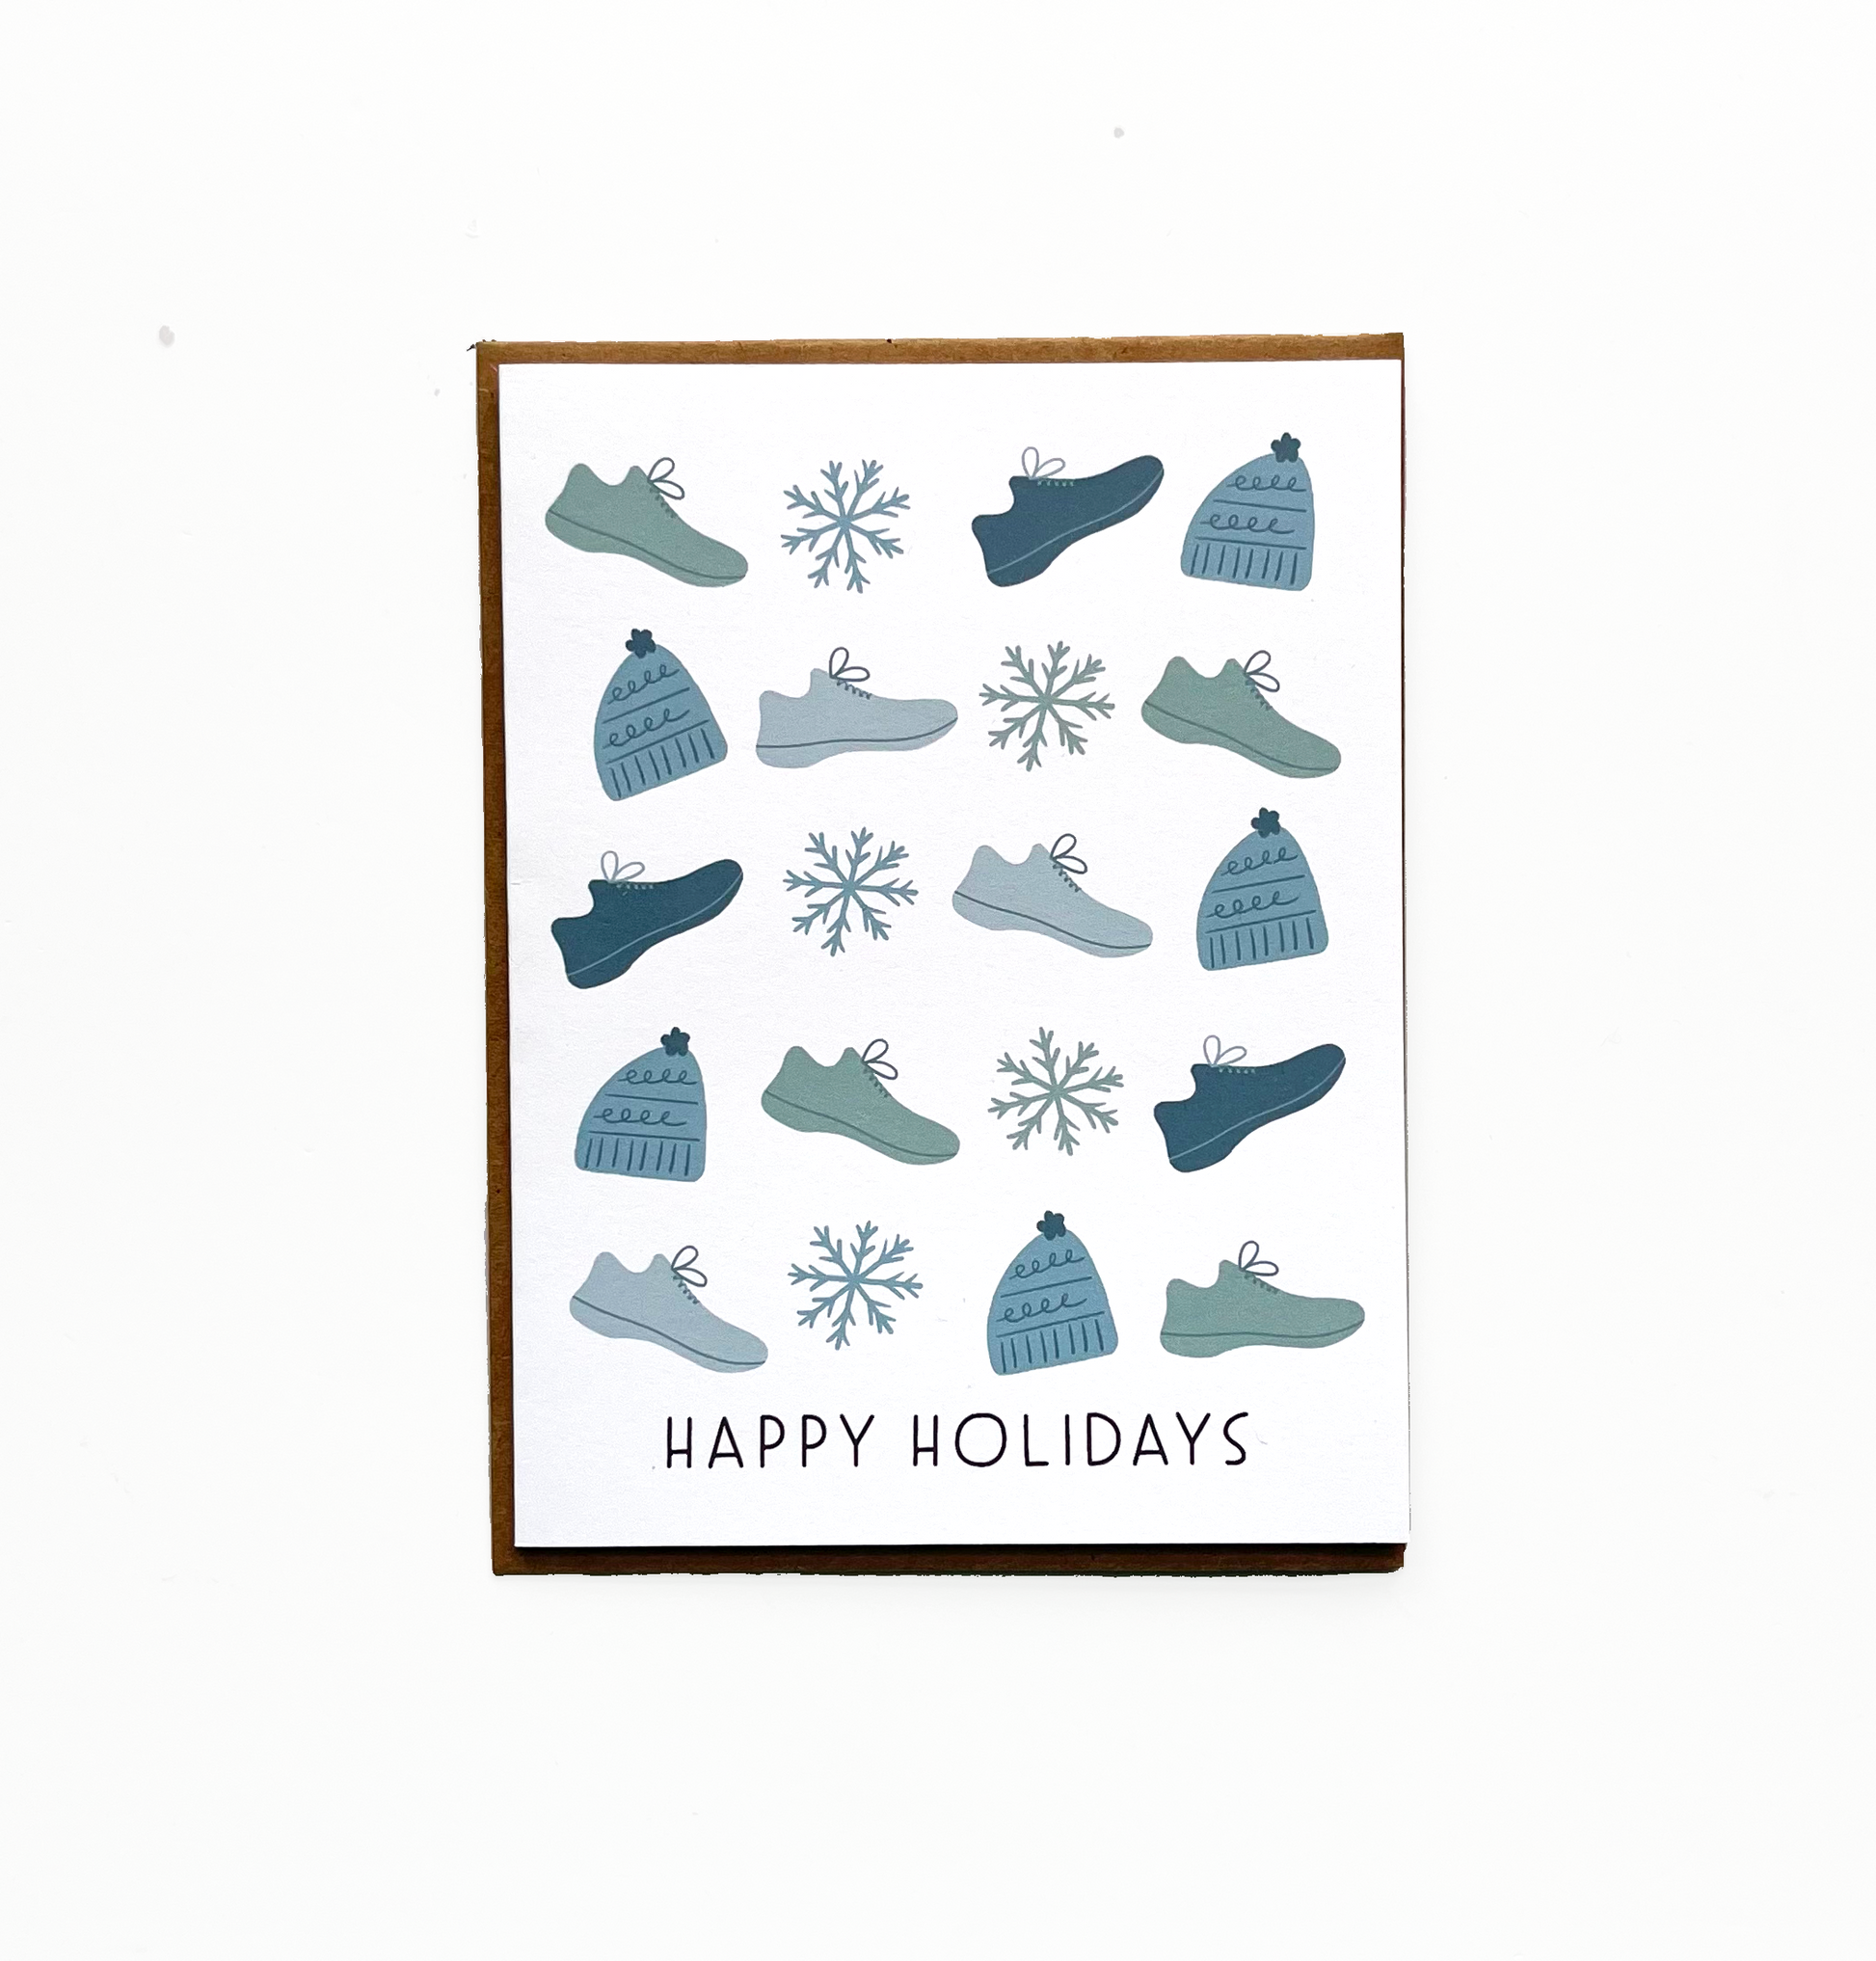 Happy holidays text at the bottom with alternating runner shoe, snowflake and hat design in shades of blue